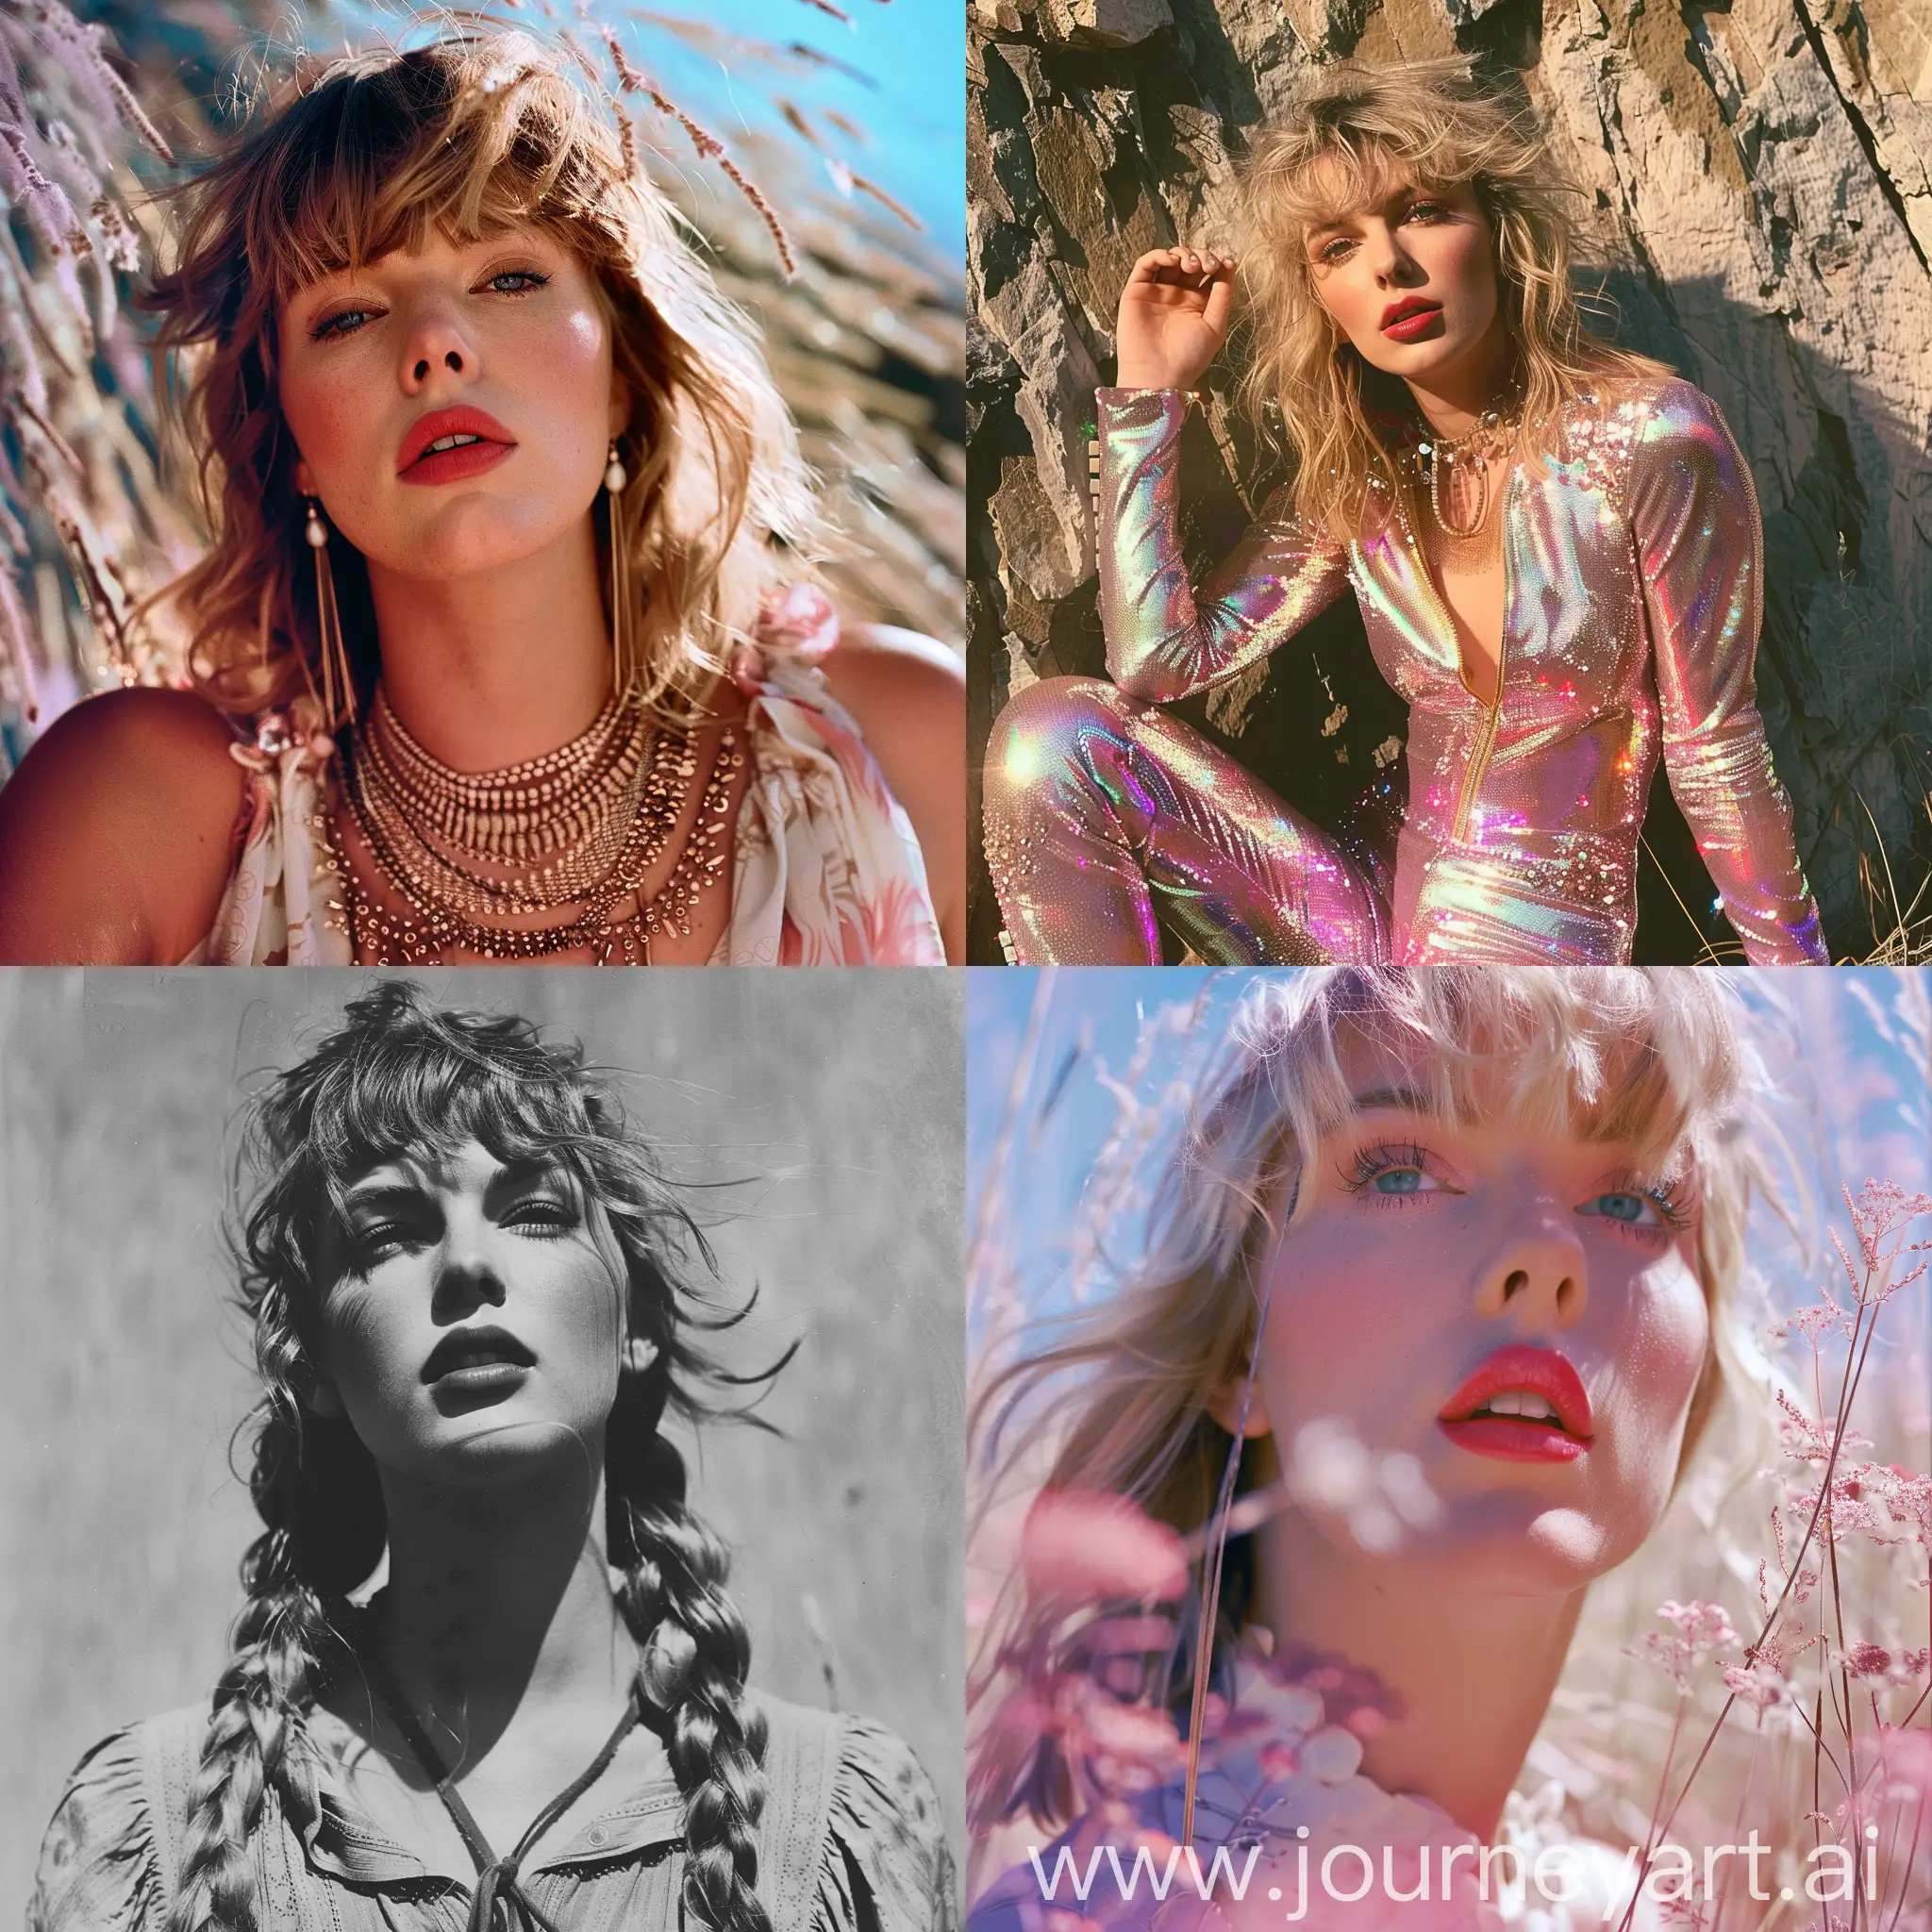 Taylor-Swift-Performing-Live-on-Stage-with-Intense-Lighting-Effects